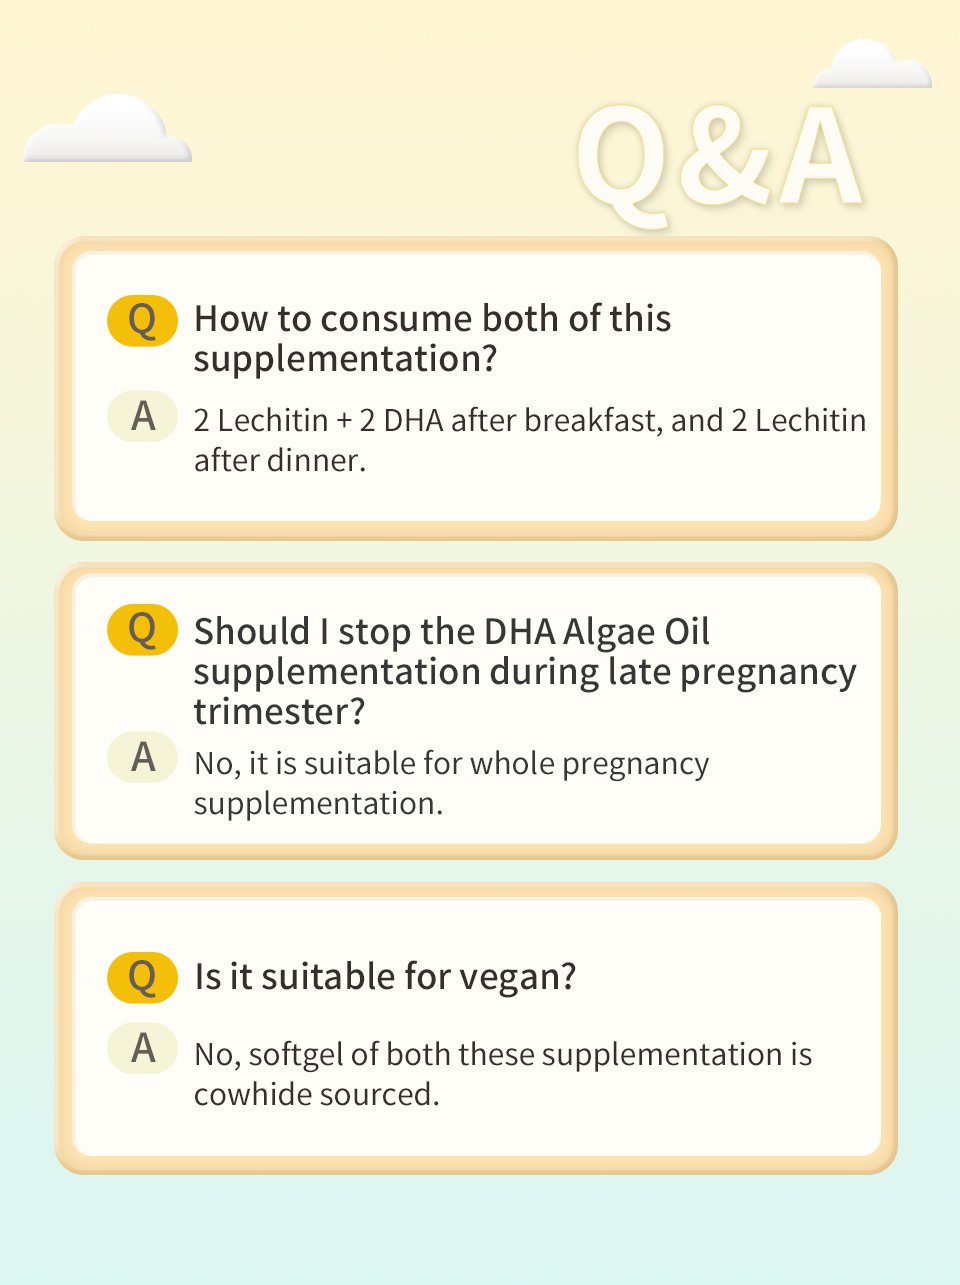 Unlike fish oil, BHK's DHA Algae oil doesn't contain high amount EPA, safe to be consumed throughout pregnancy 